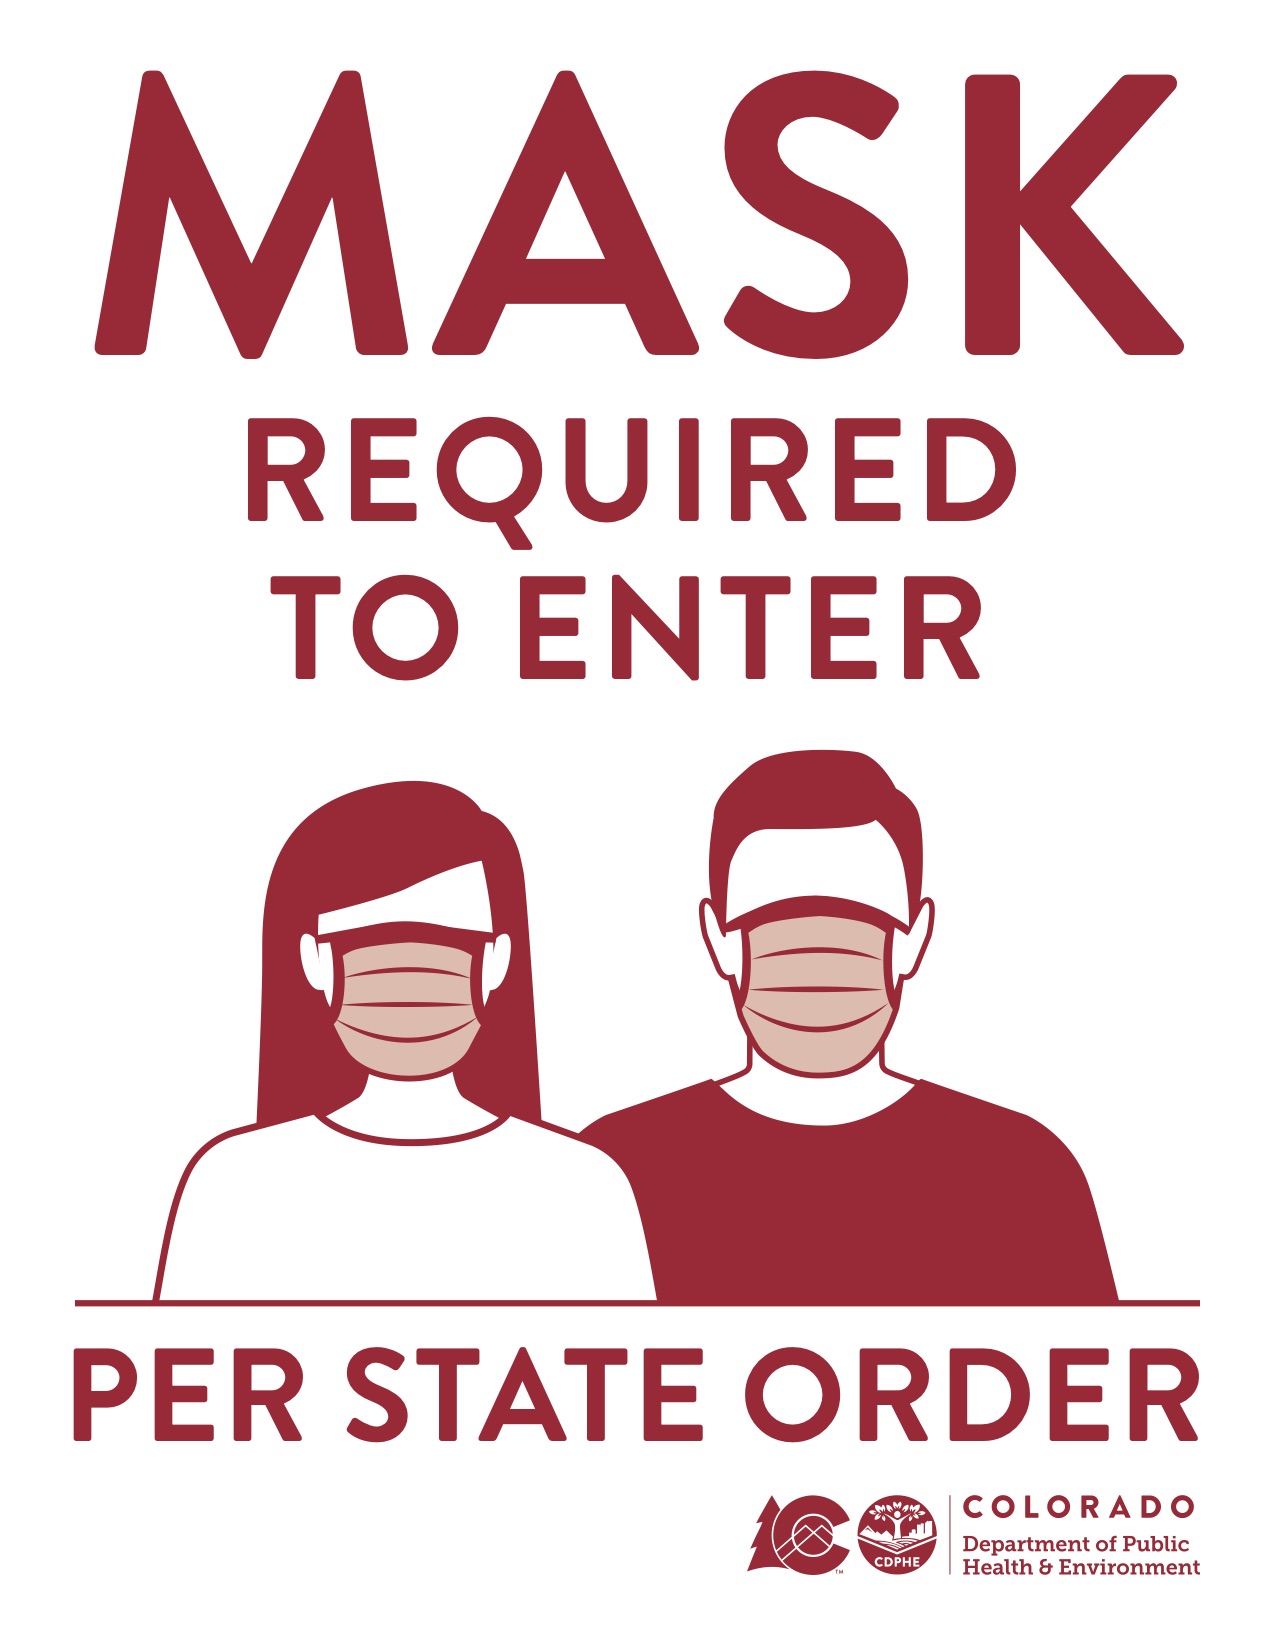 statewide-mask-mandate-issued-by-governor-jared-polis